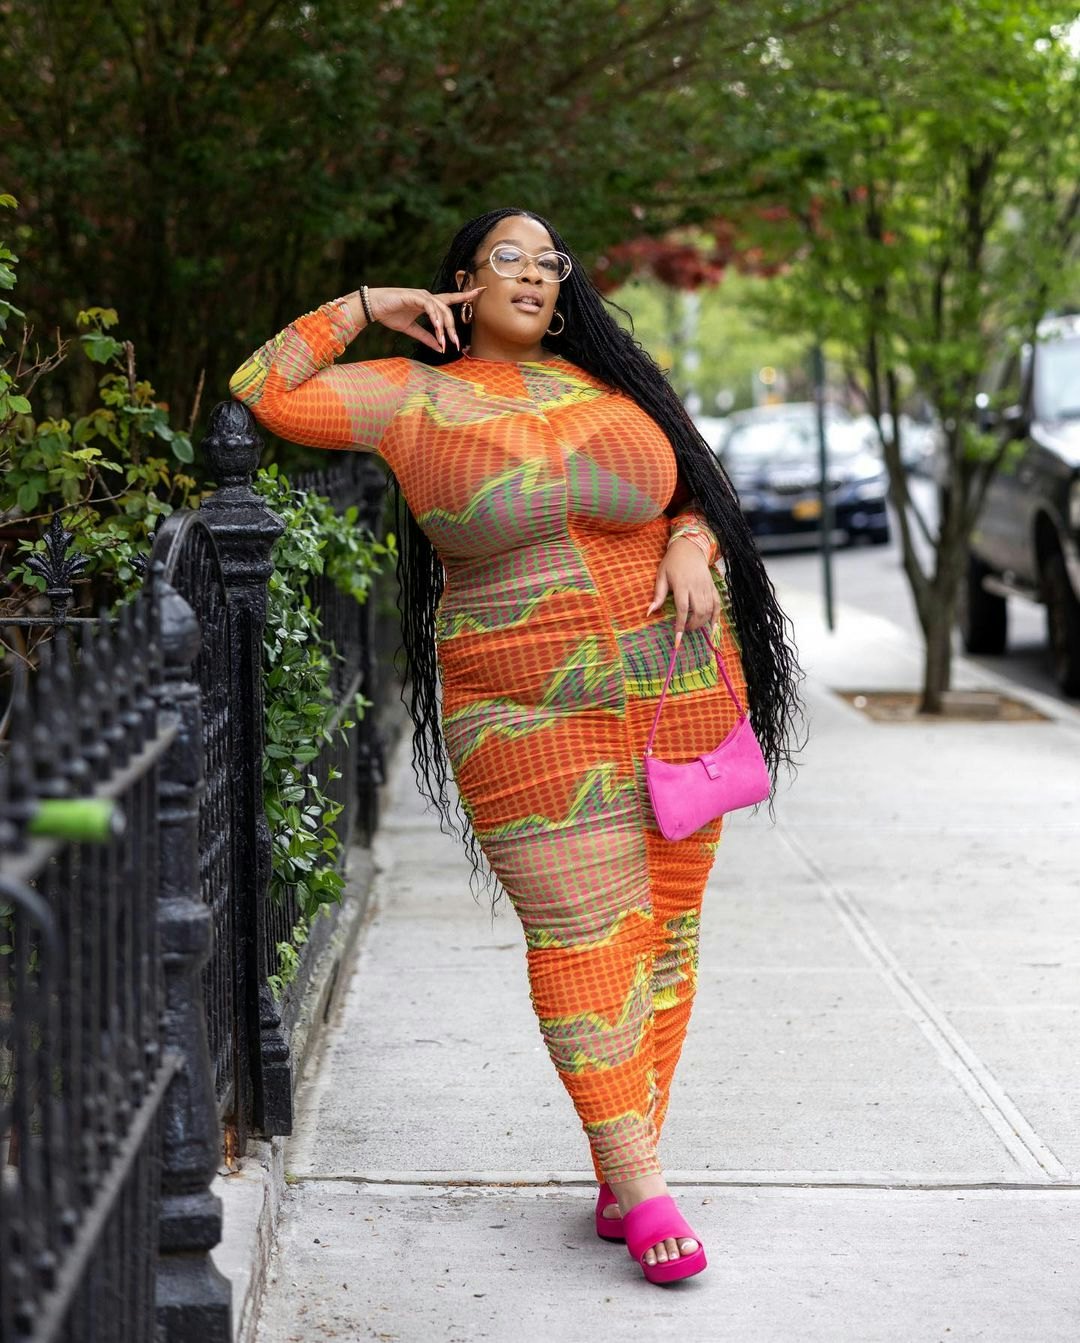 What Queer Femmes of All Sizes Should Wear to Show Their LGBTQ+